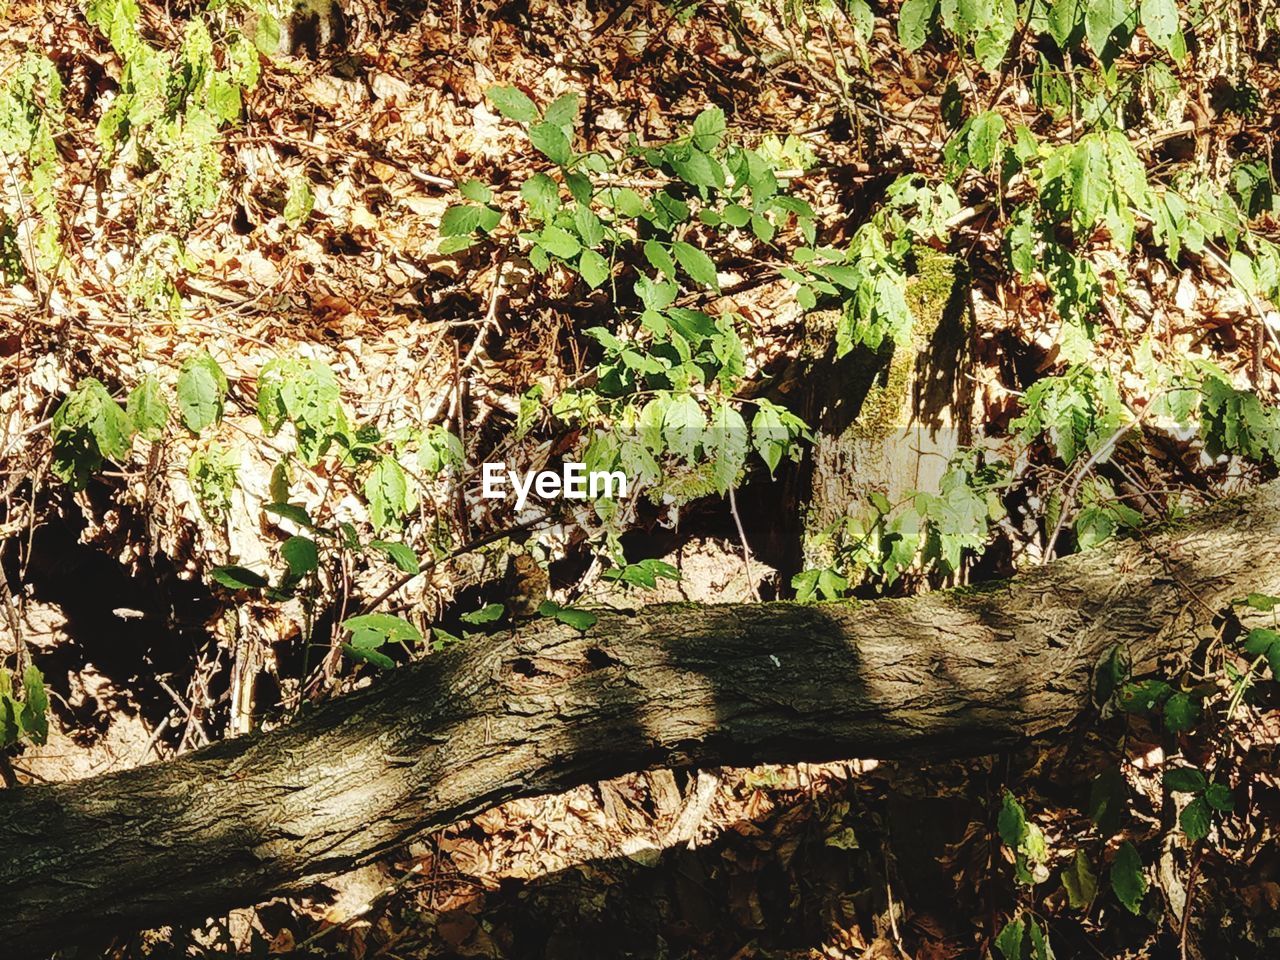 PLANTS GROWING ON TREE TRUNK IN FOREST